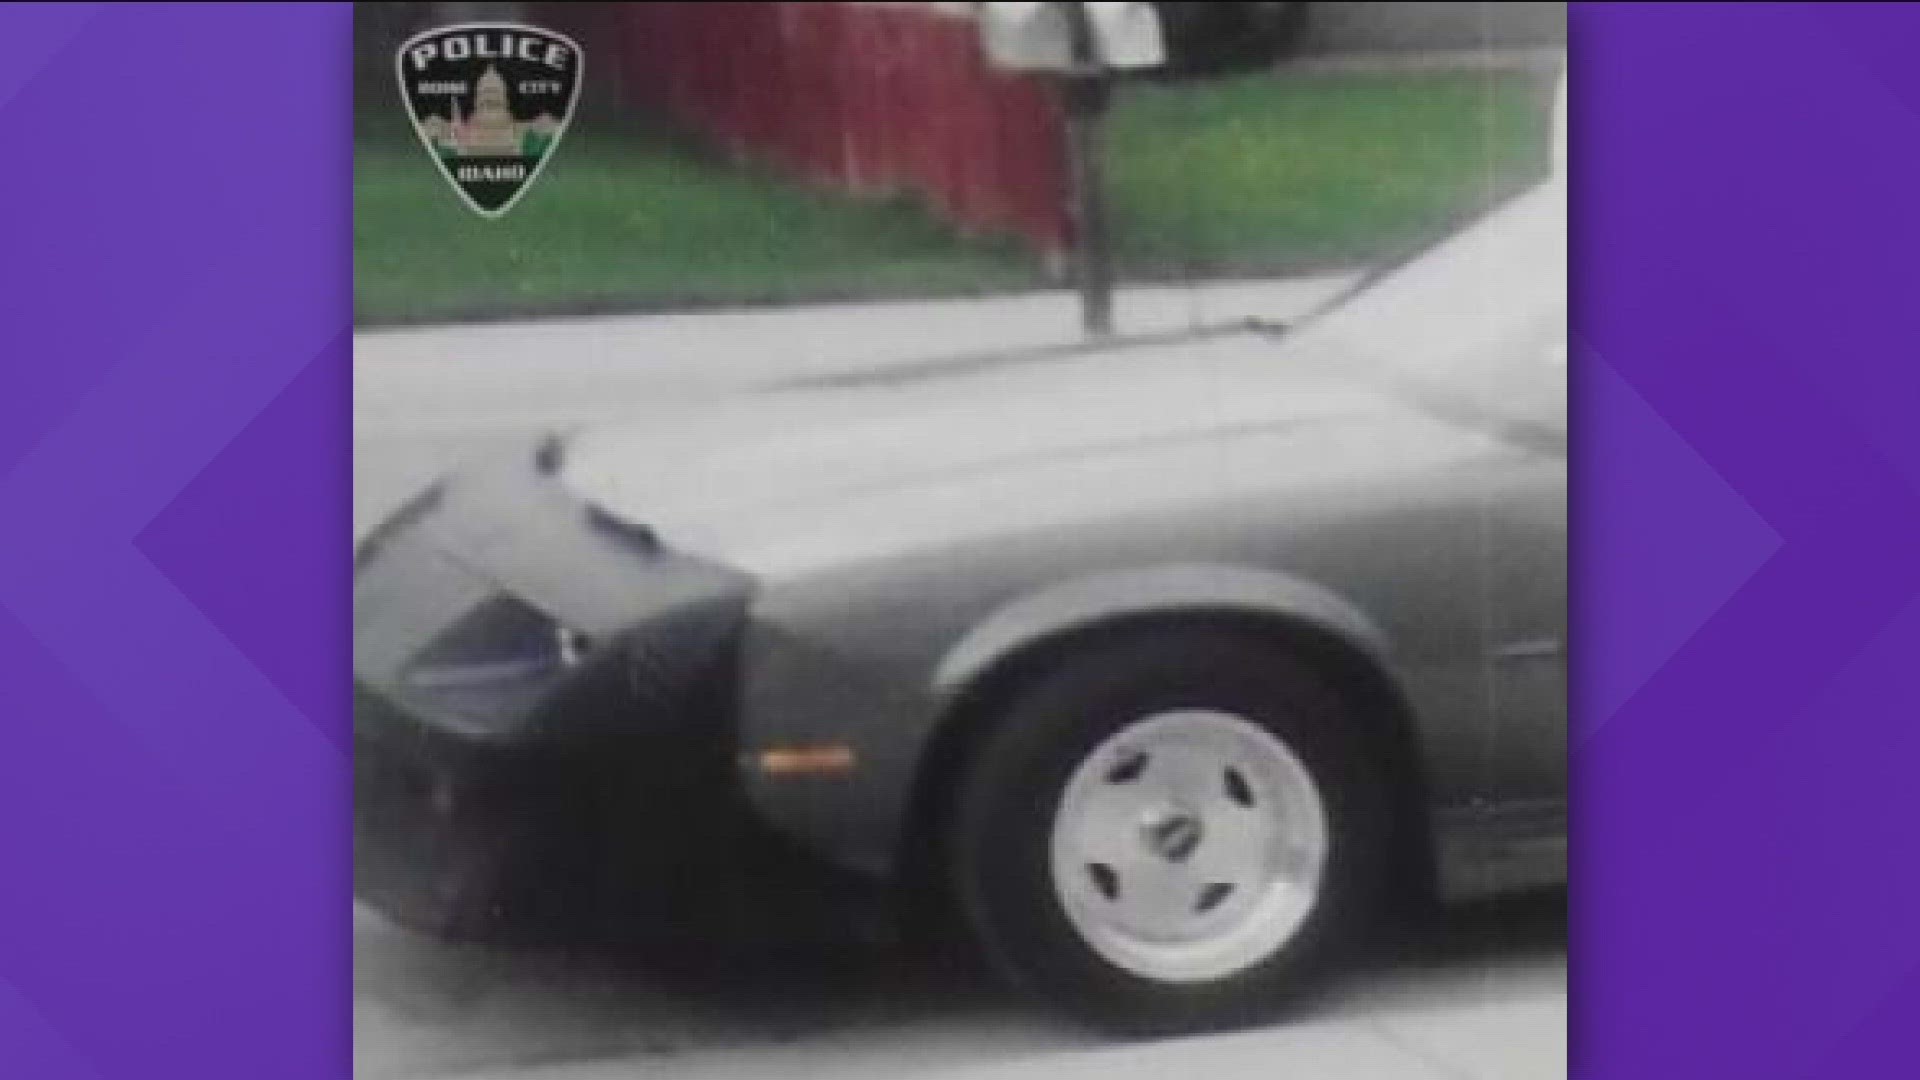 Boise Police are looking for a 1989 Z28 Camaro that "may have been involved" in the 1994 disappearance of Krystyn Dunlap-Bosse.